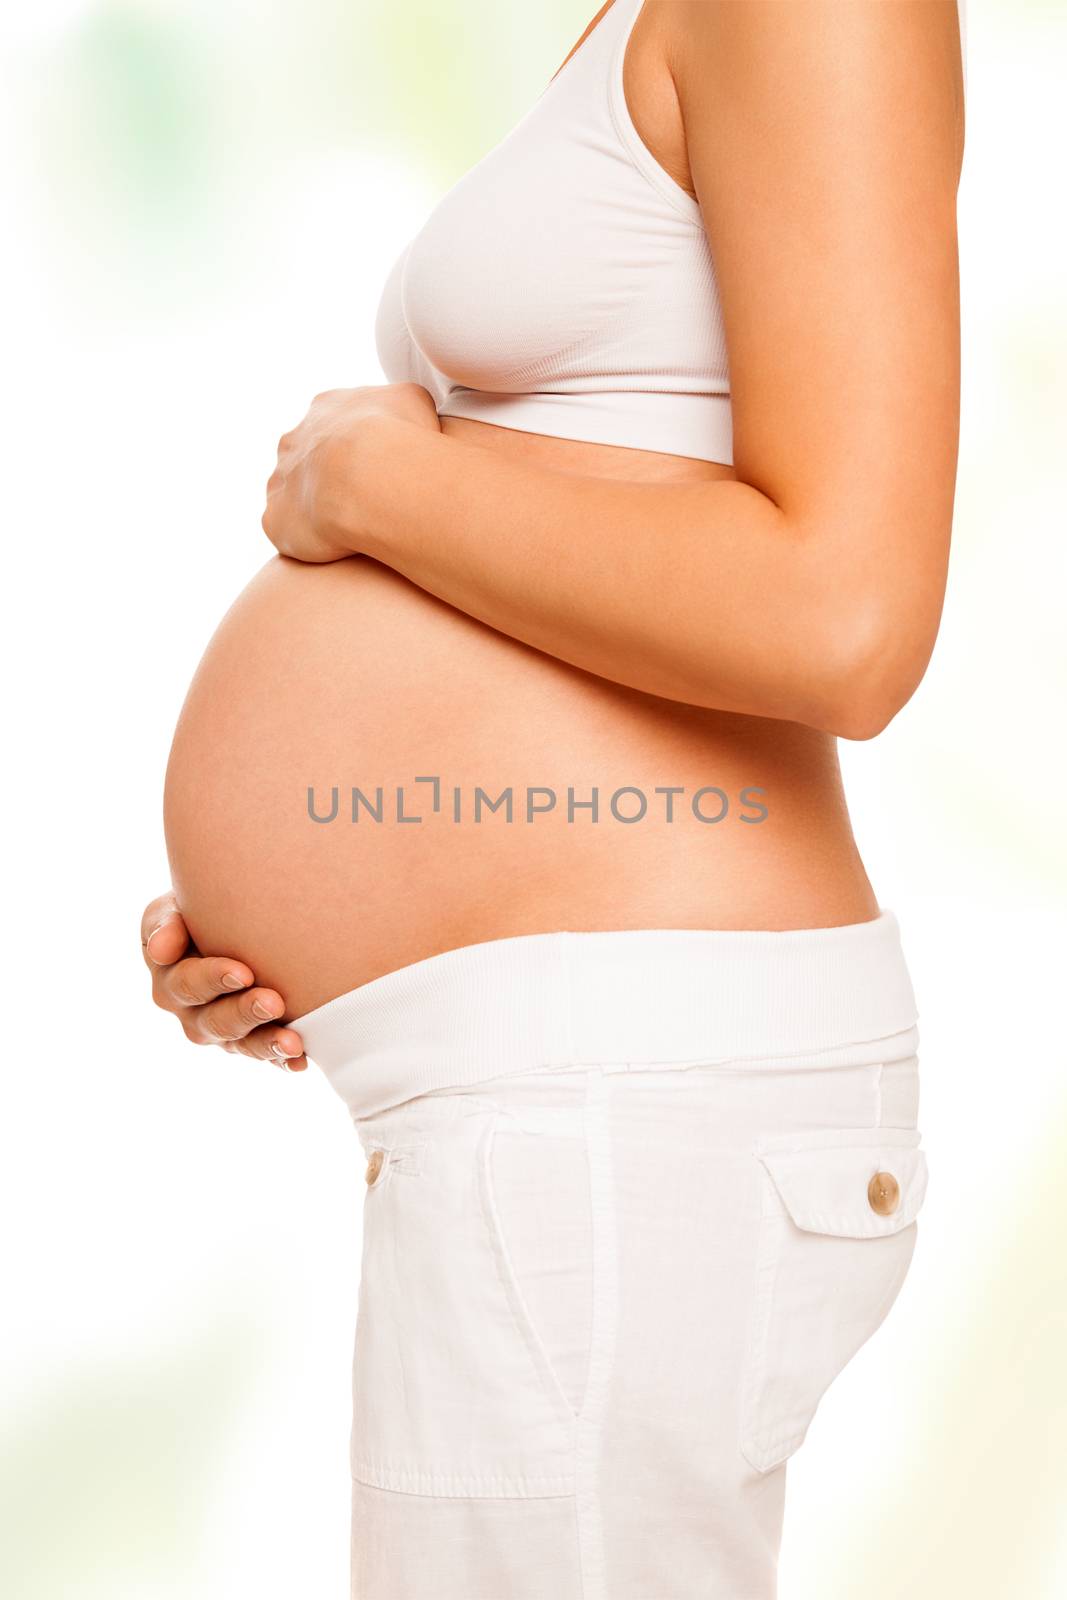 Pregnant woman is holding her abdomen on light background, isolated with work path.